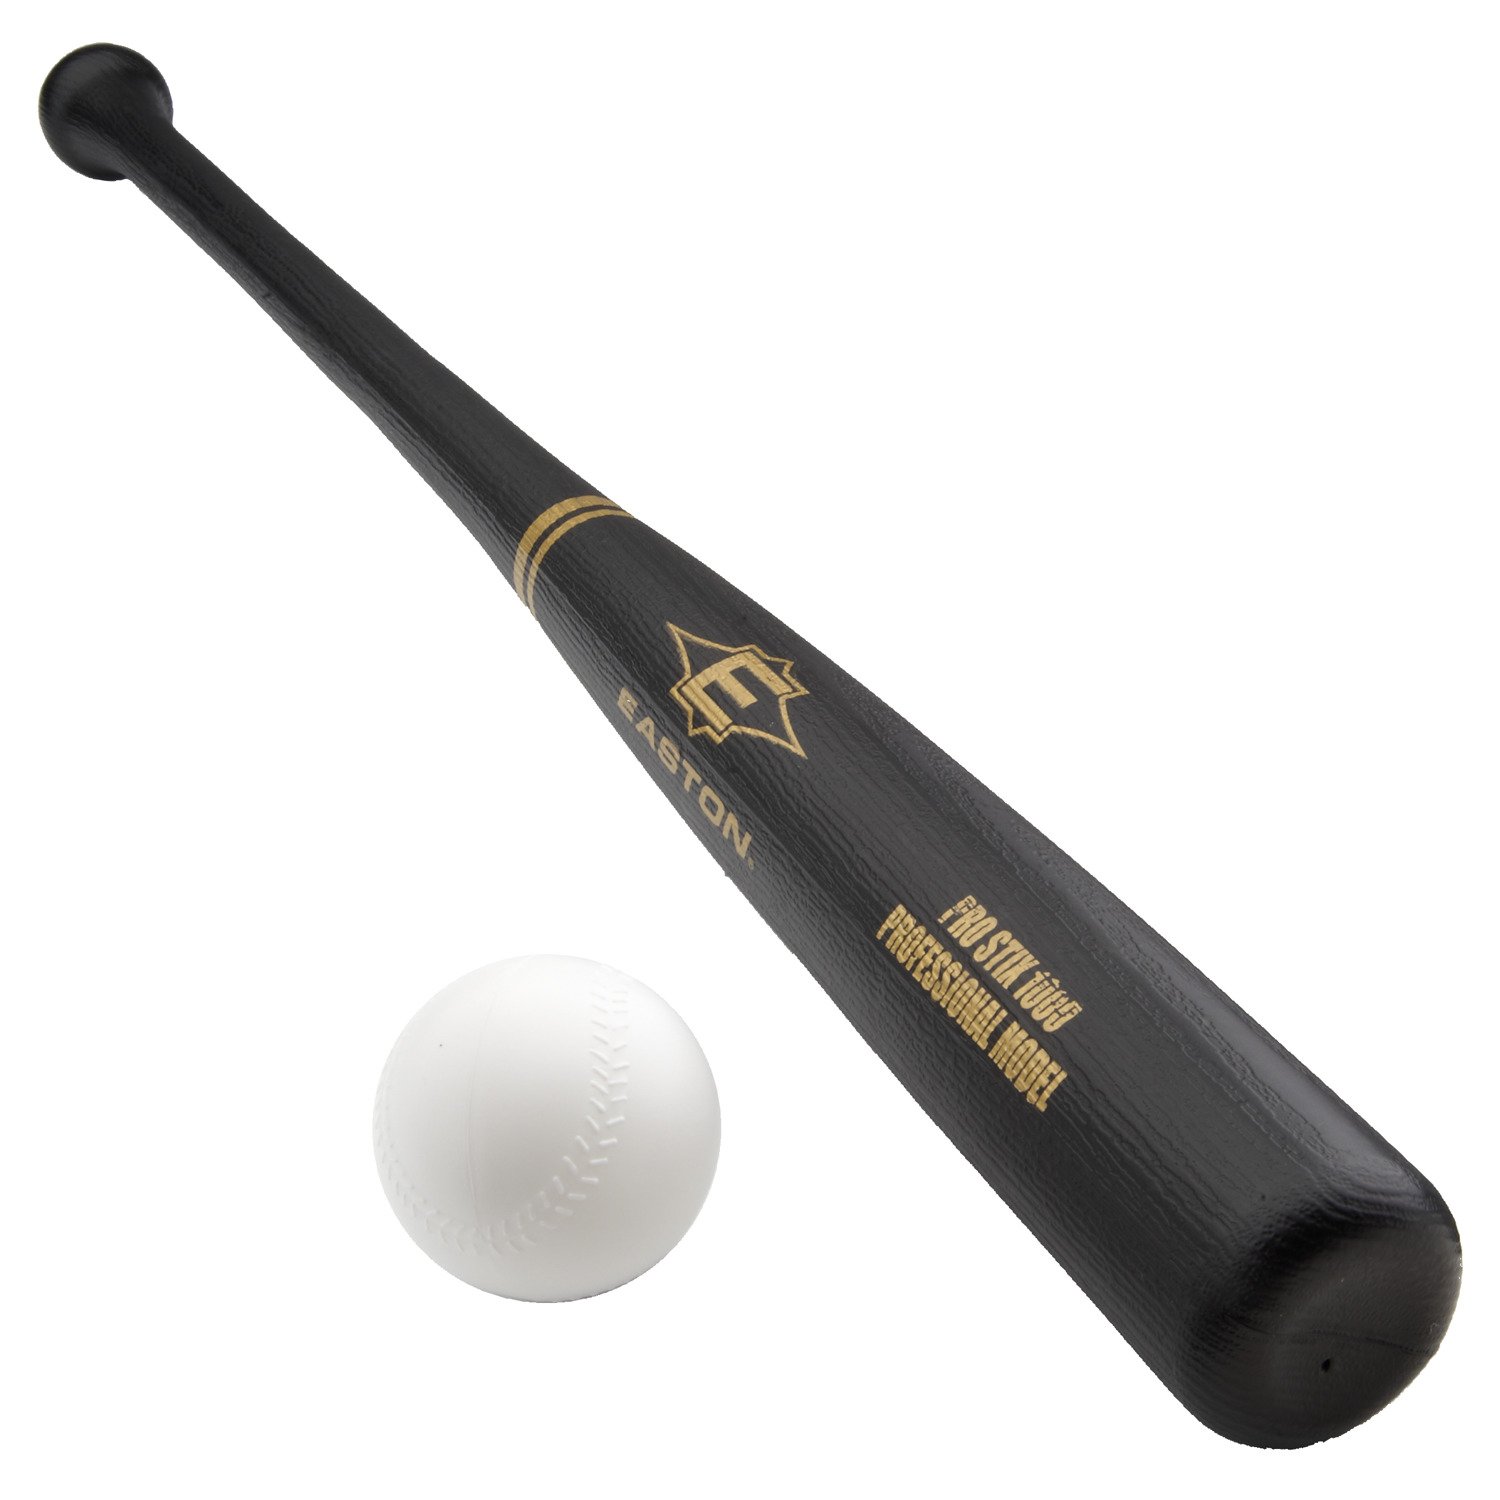 Best Baseball Bats For 10 Year Old 2020